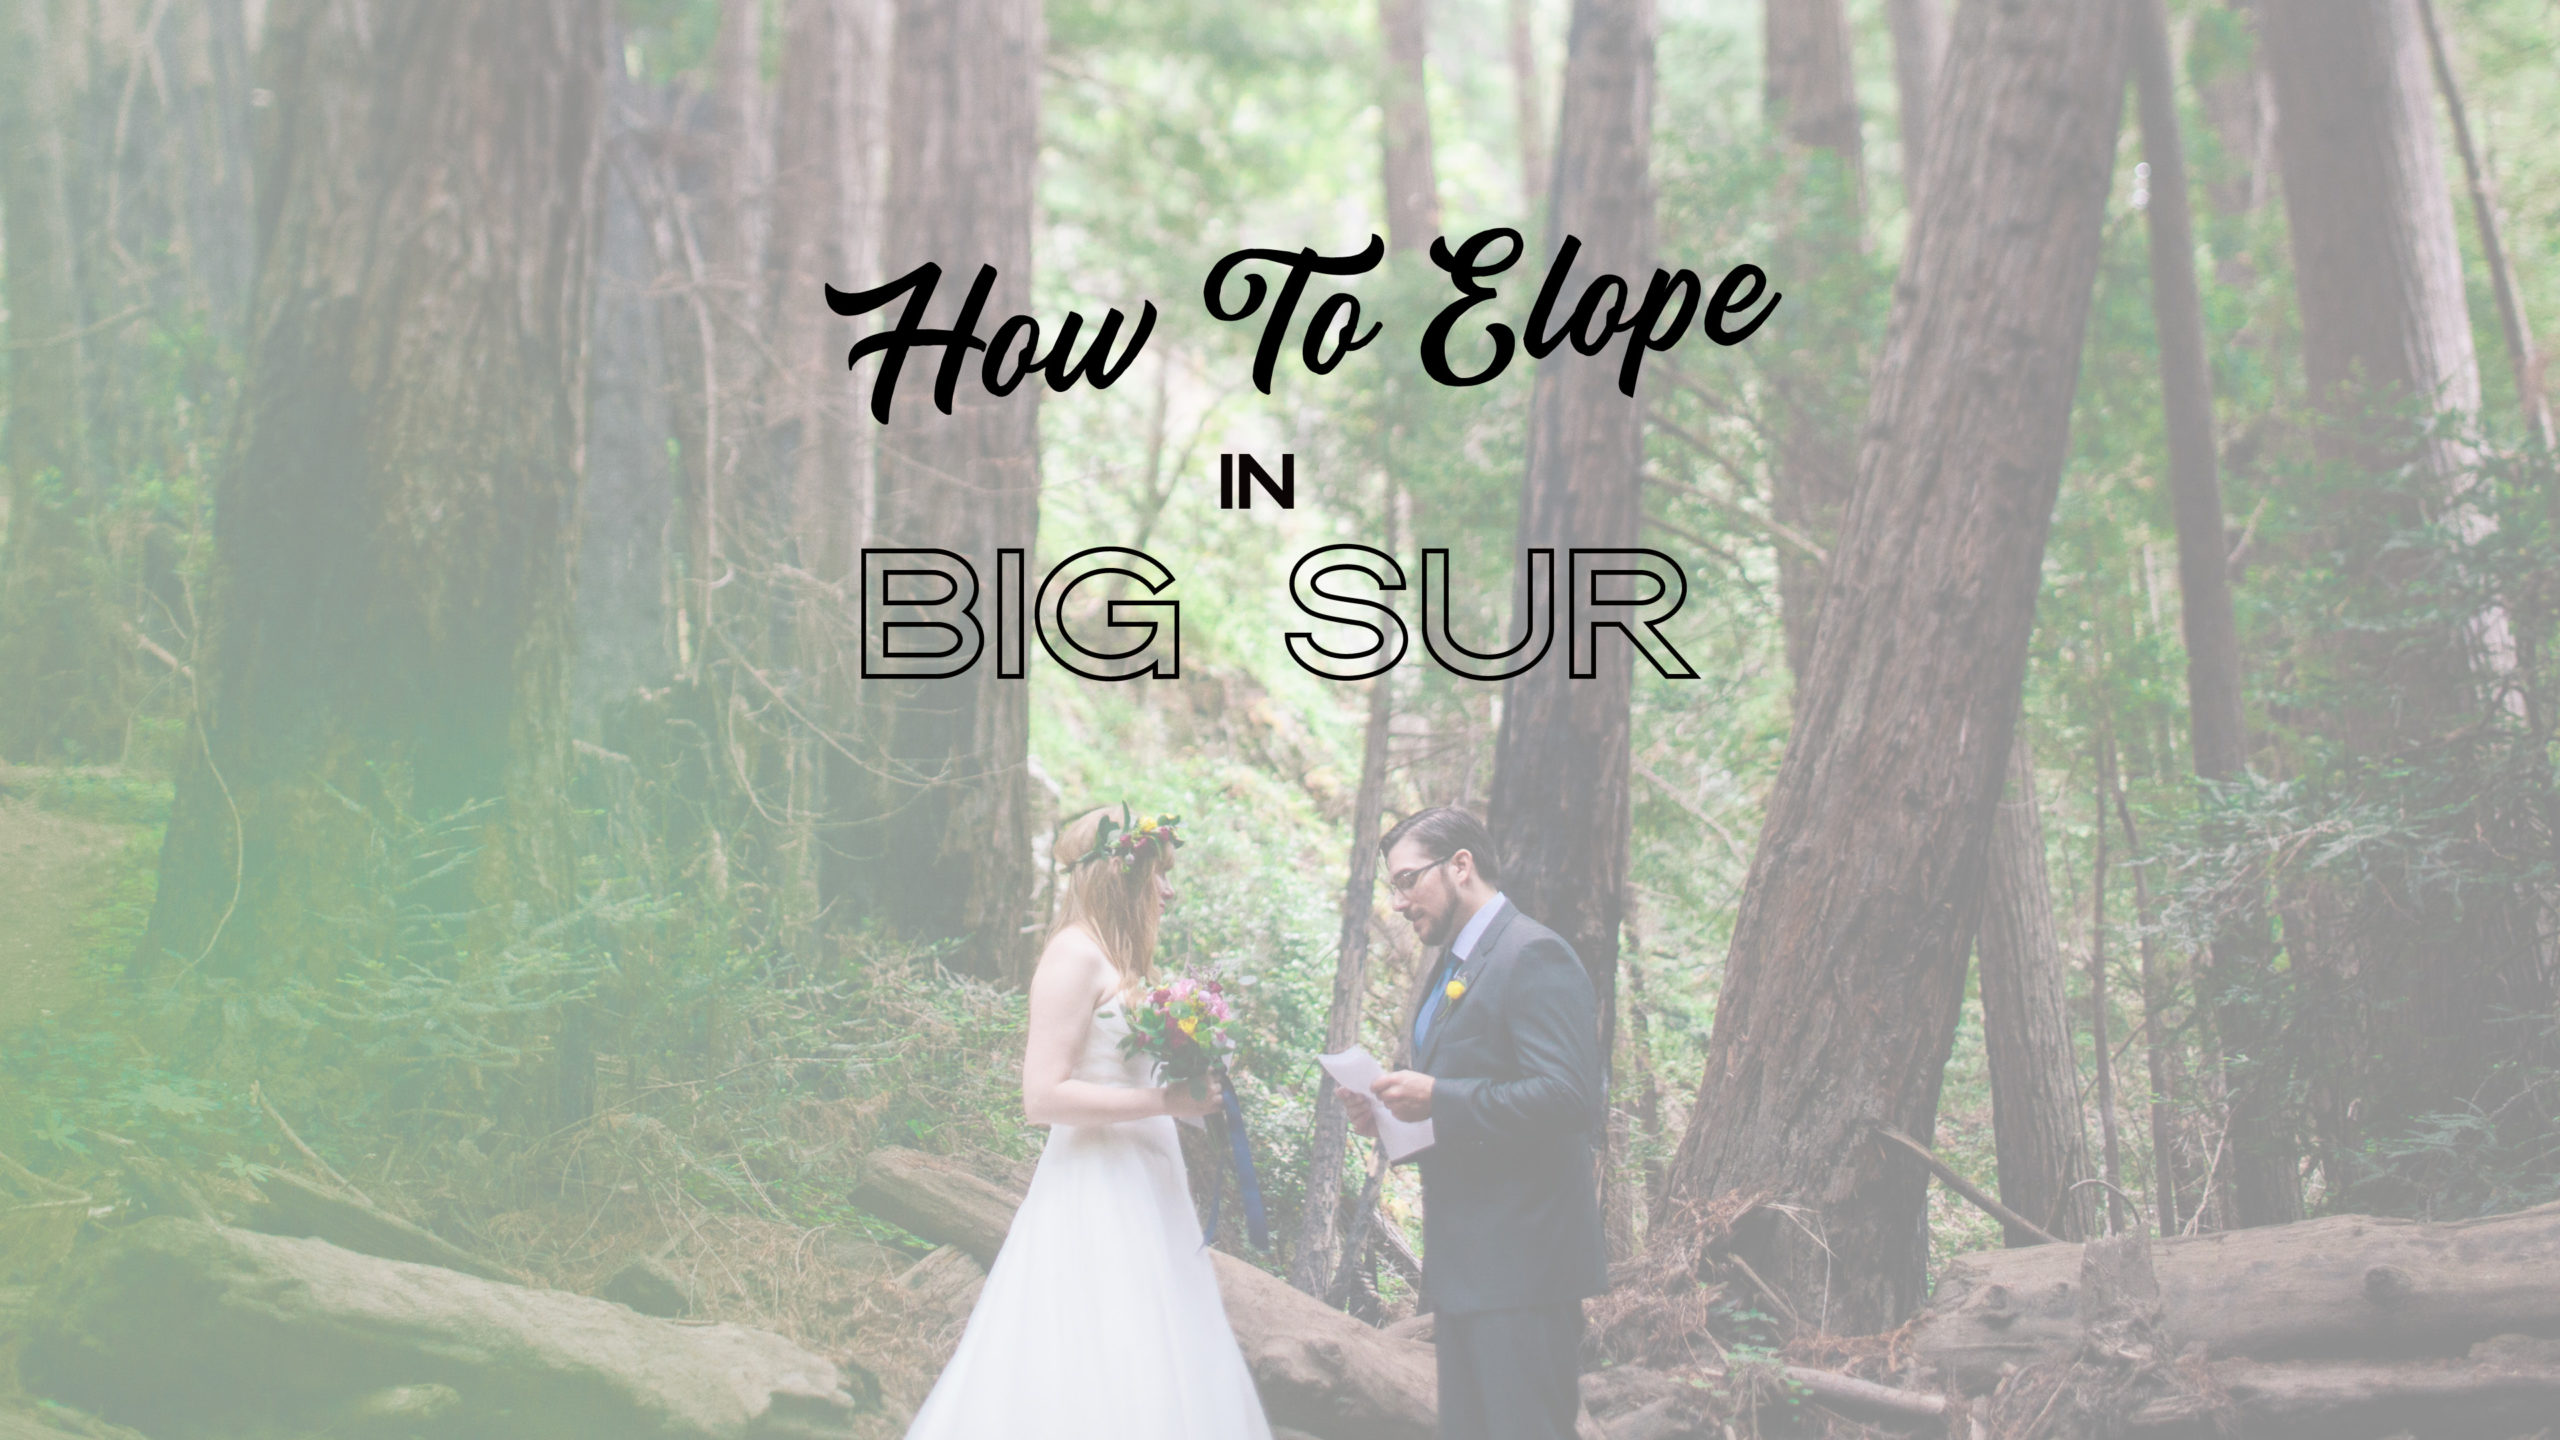 How-to-Elope-in-Big-Sur-scaled Big Sur Elopement Guide 2022 | Plan Your Dream Elopement in Big Sur, CA